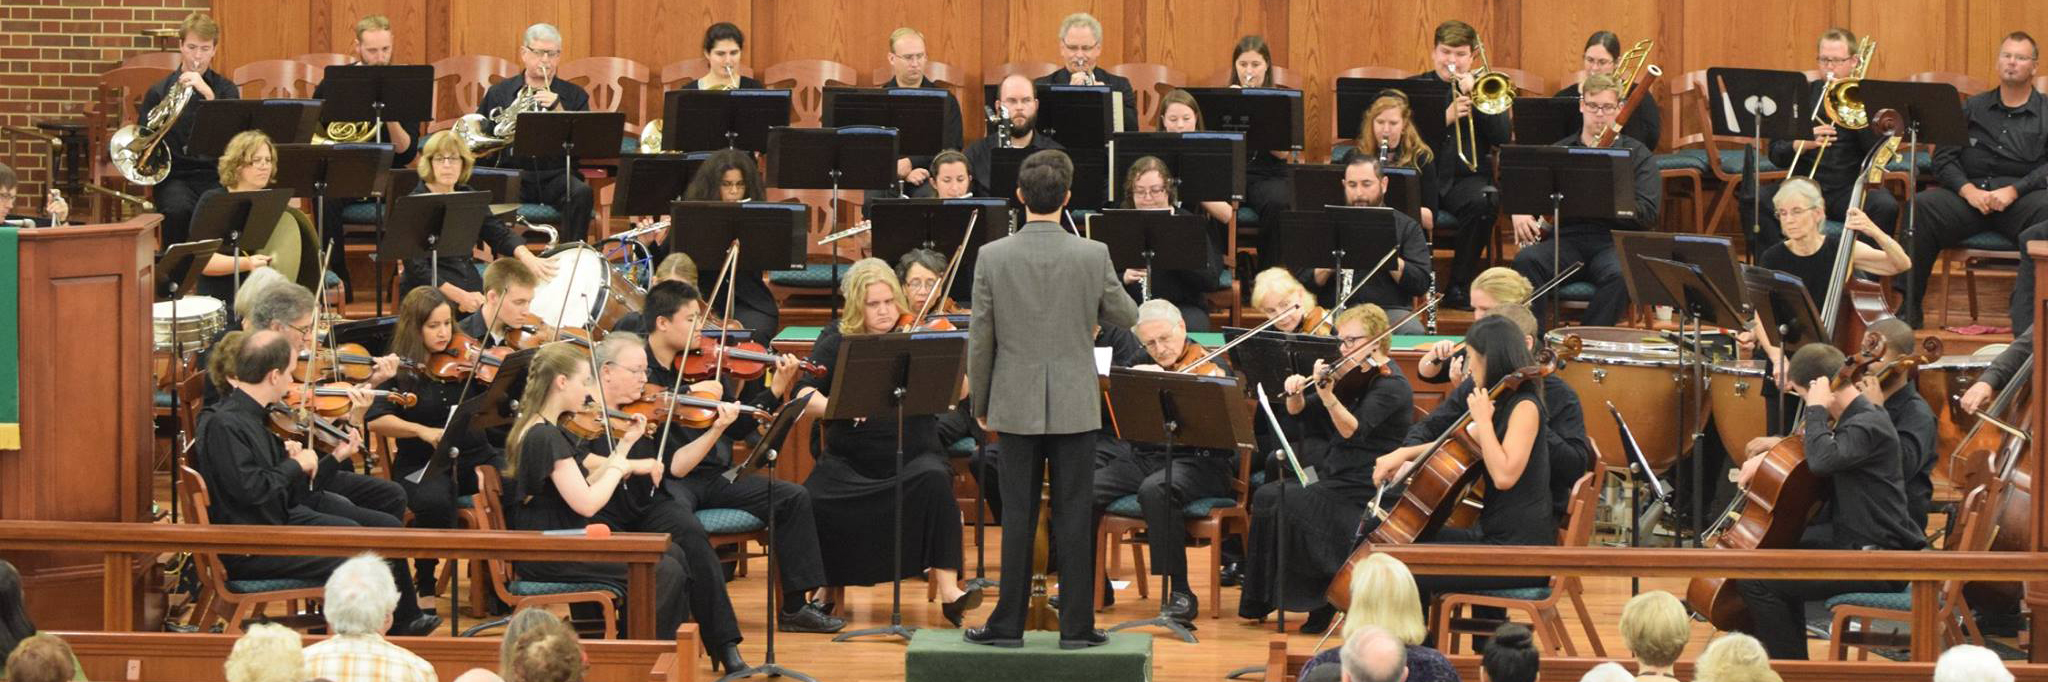 aiken civic orchestra cropped 1